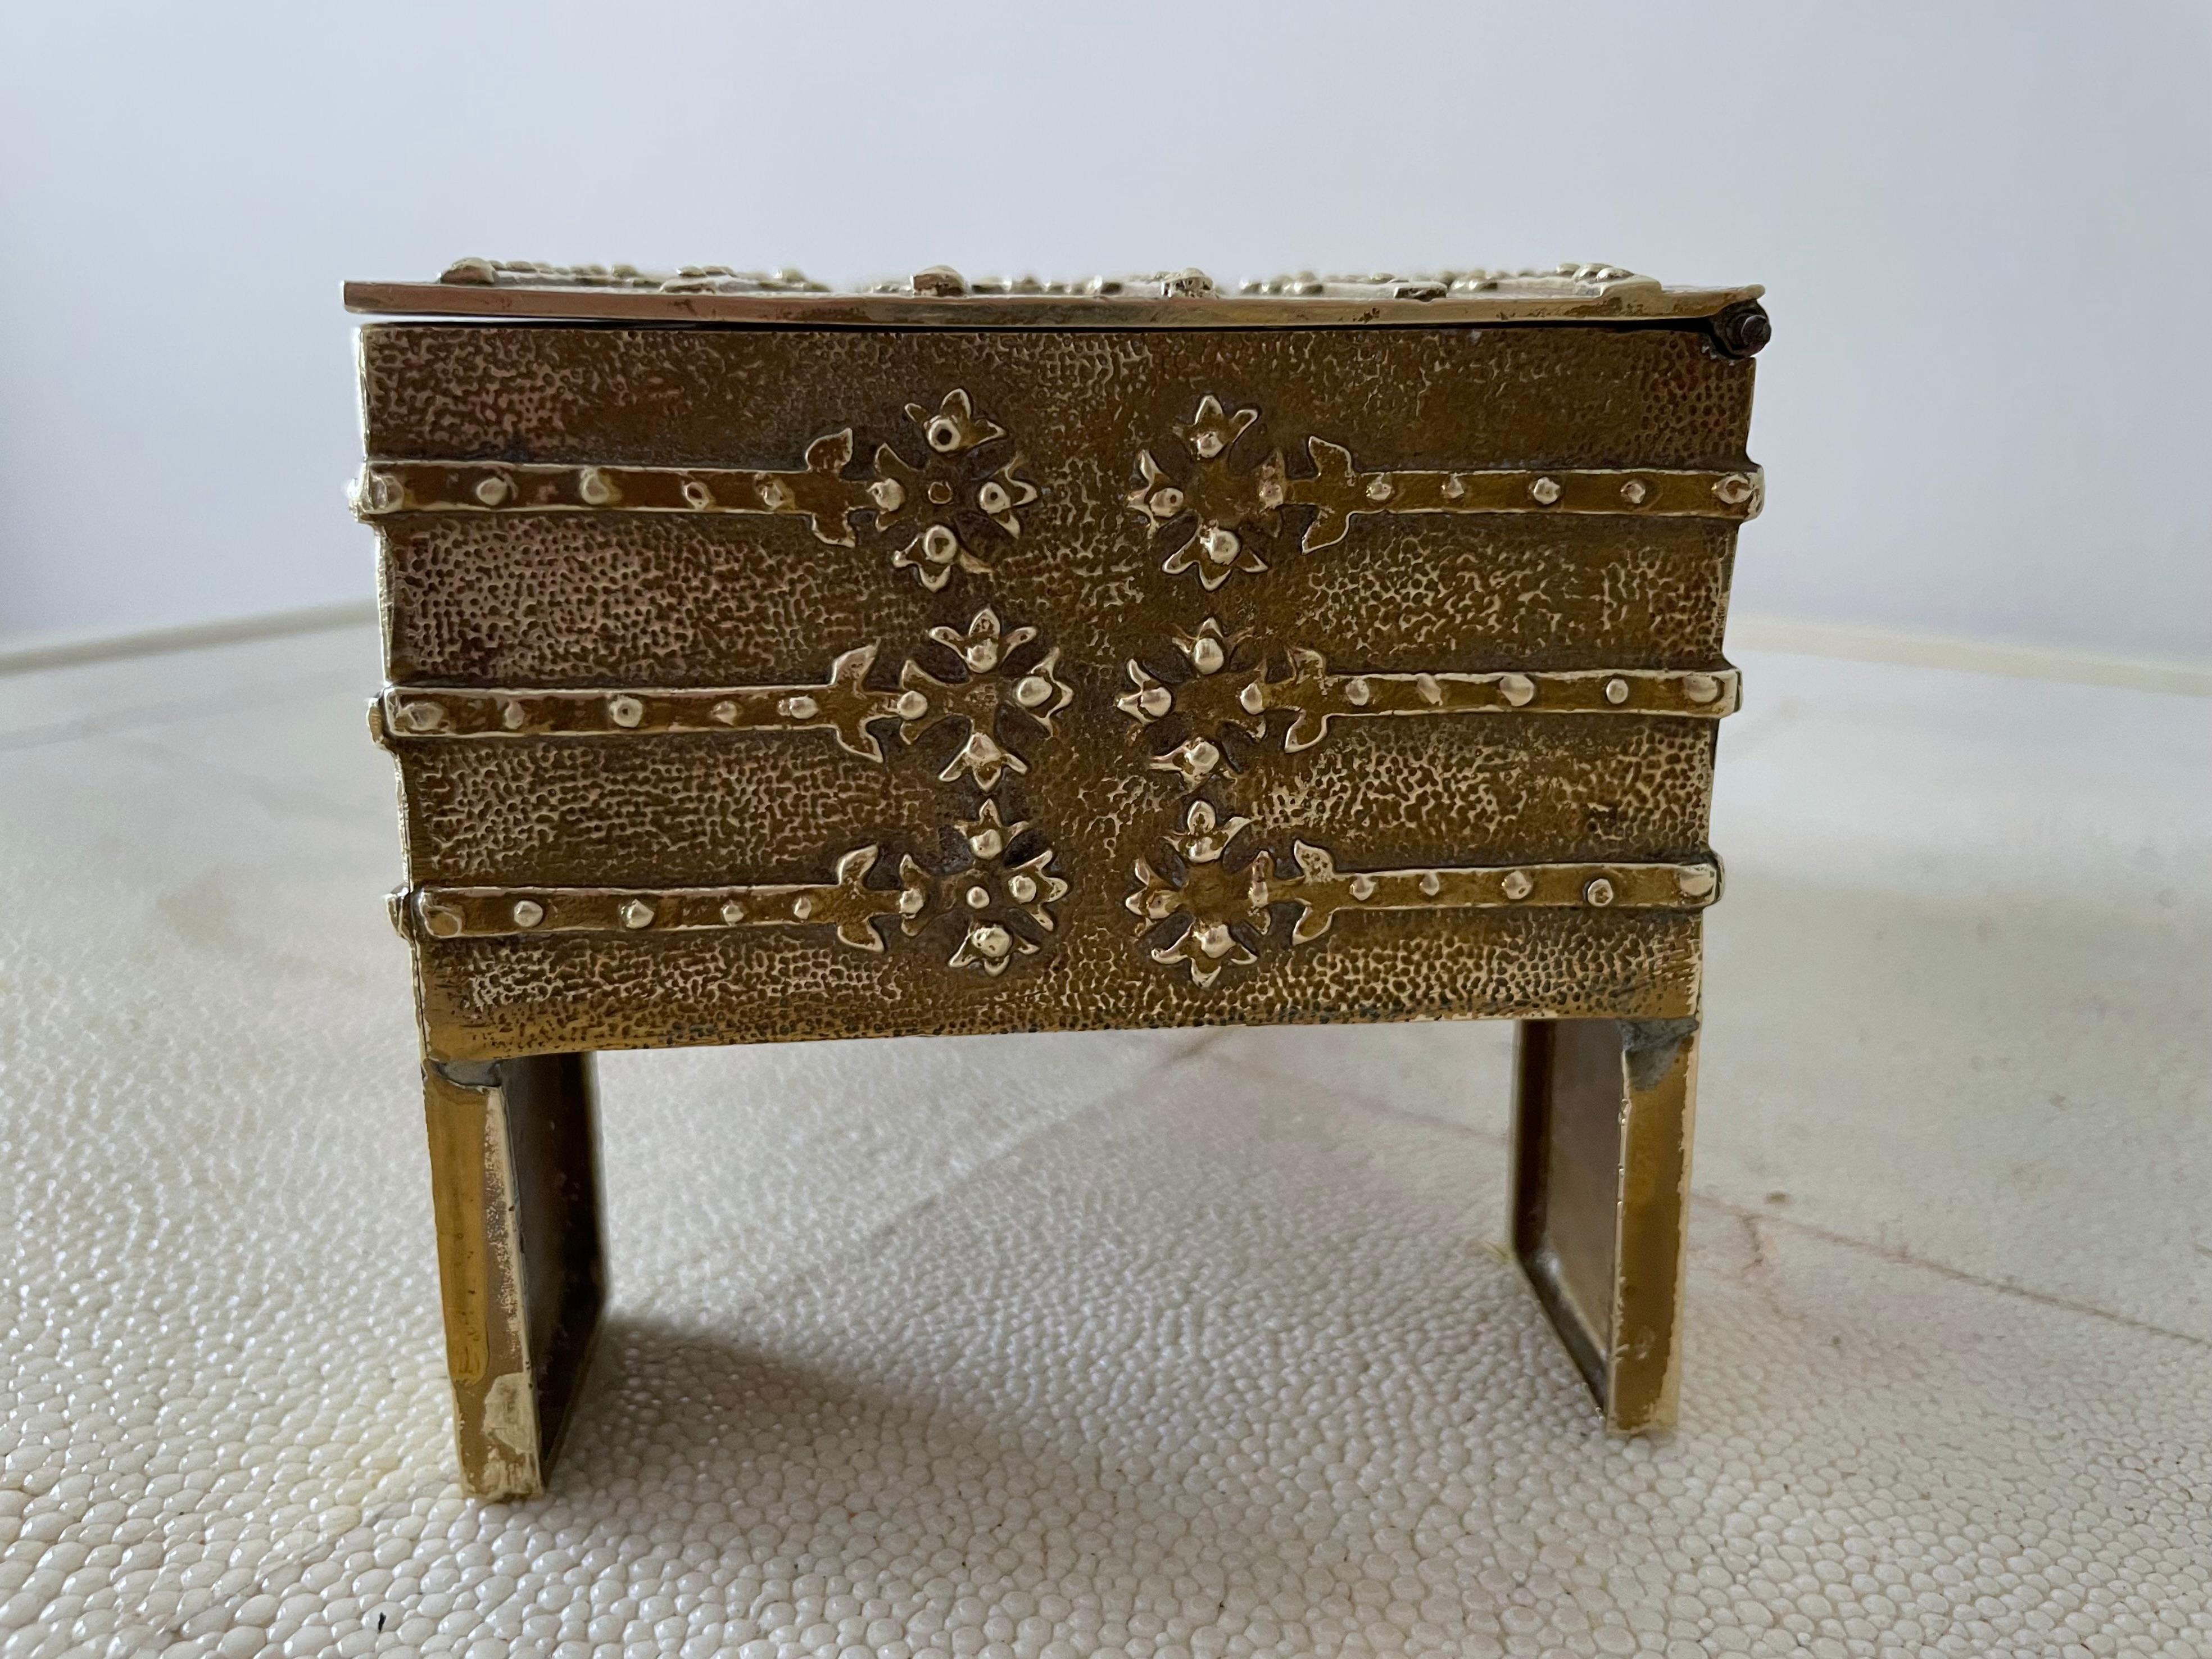 Brutalist Hammered Brass Box or Jewelry Casket For Sale 8